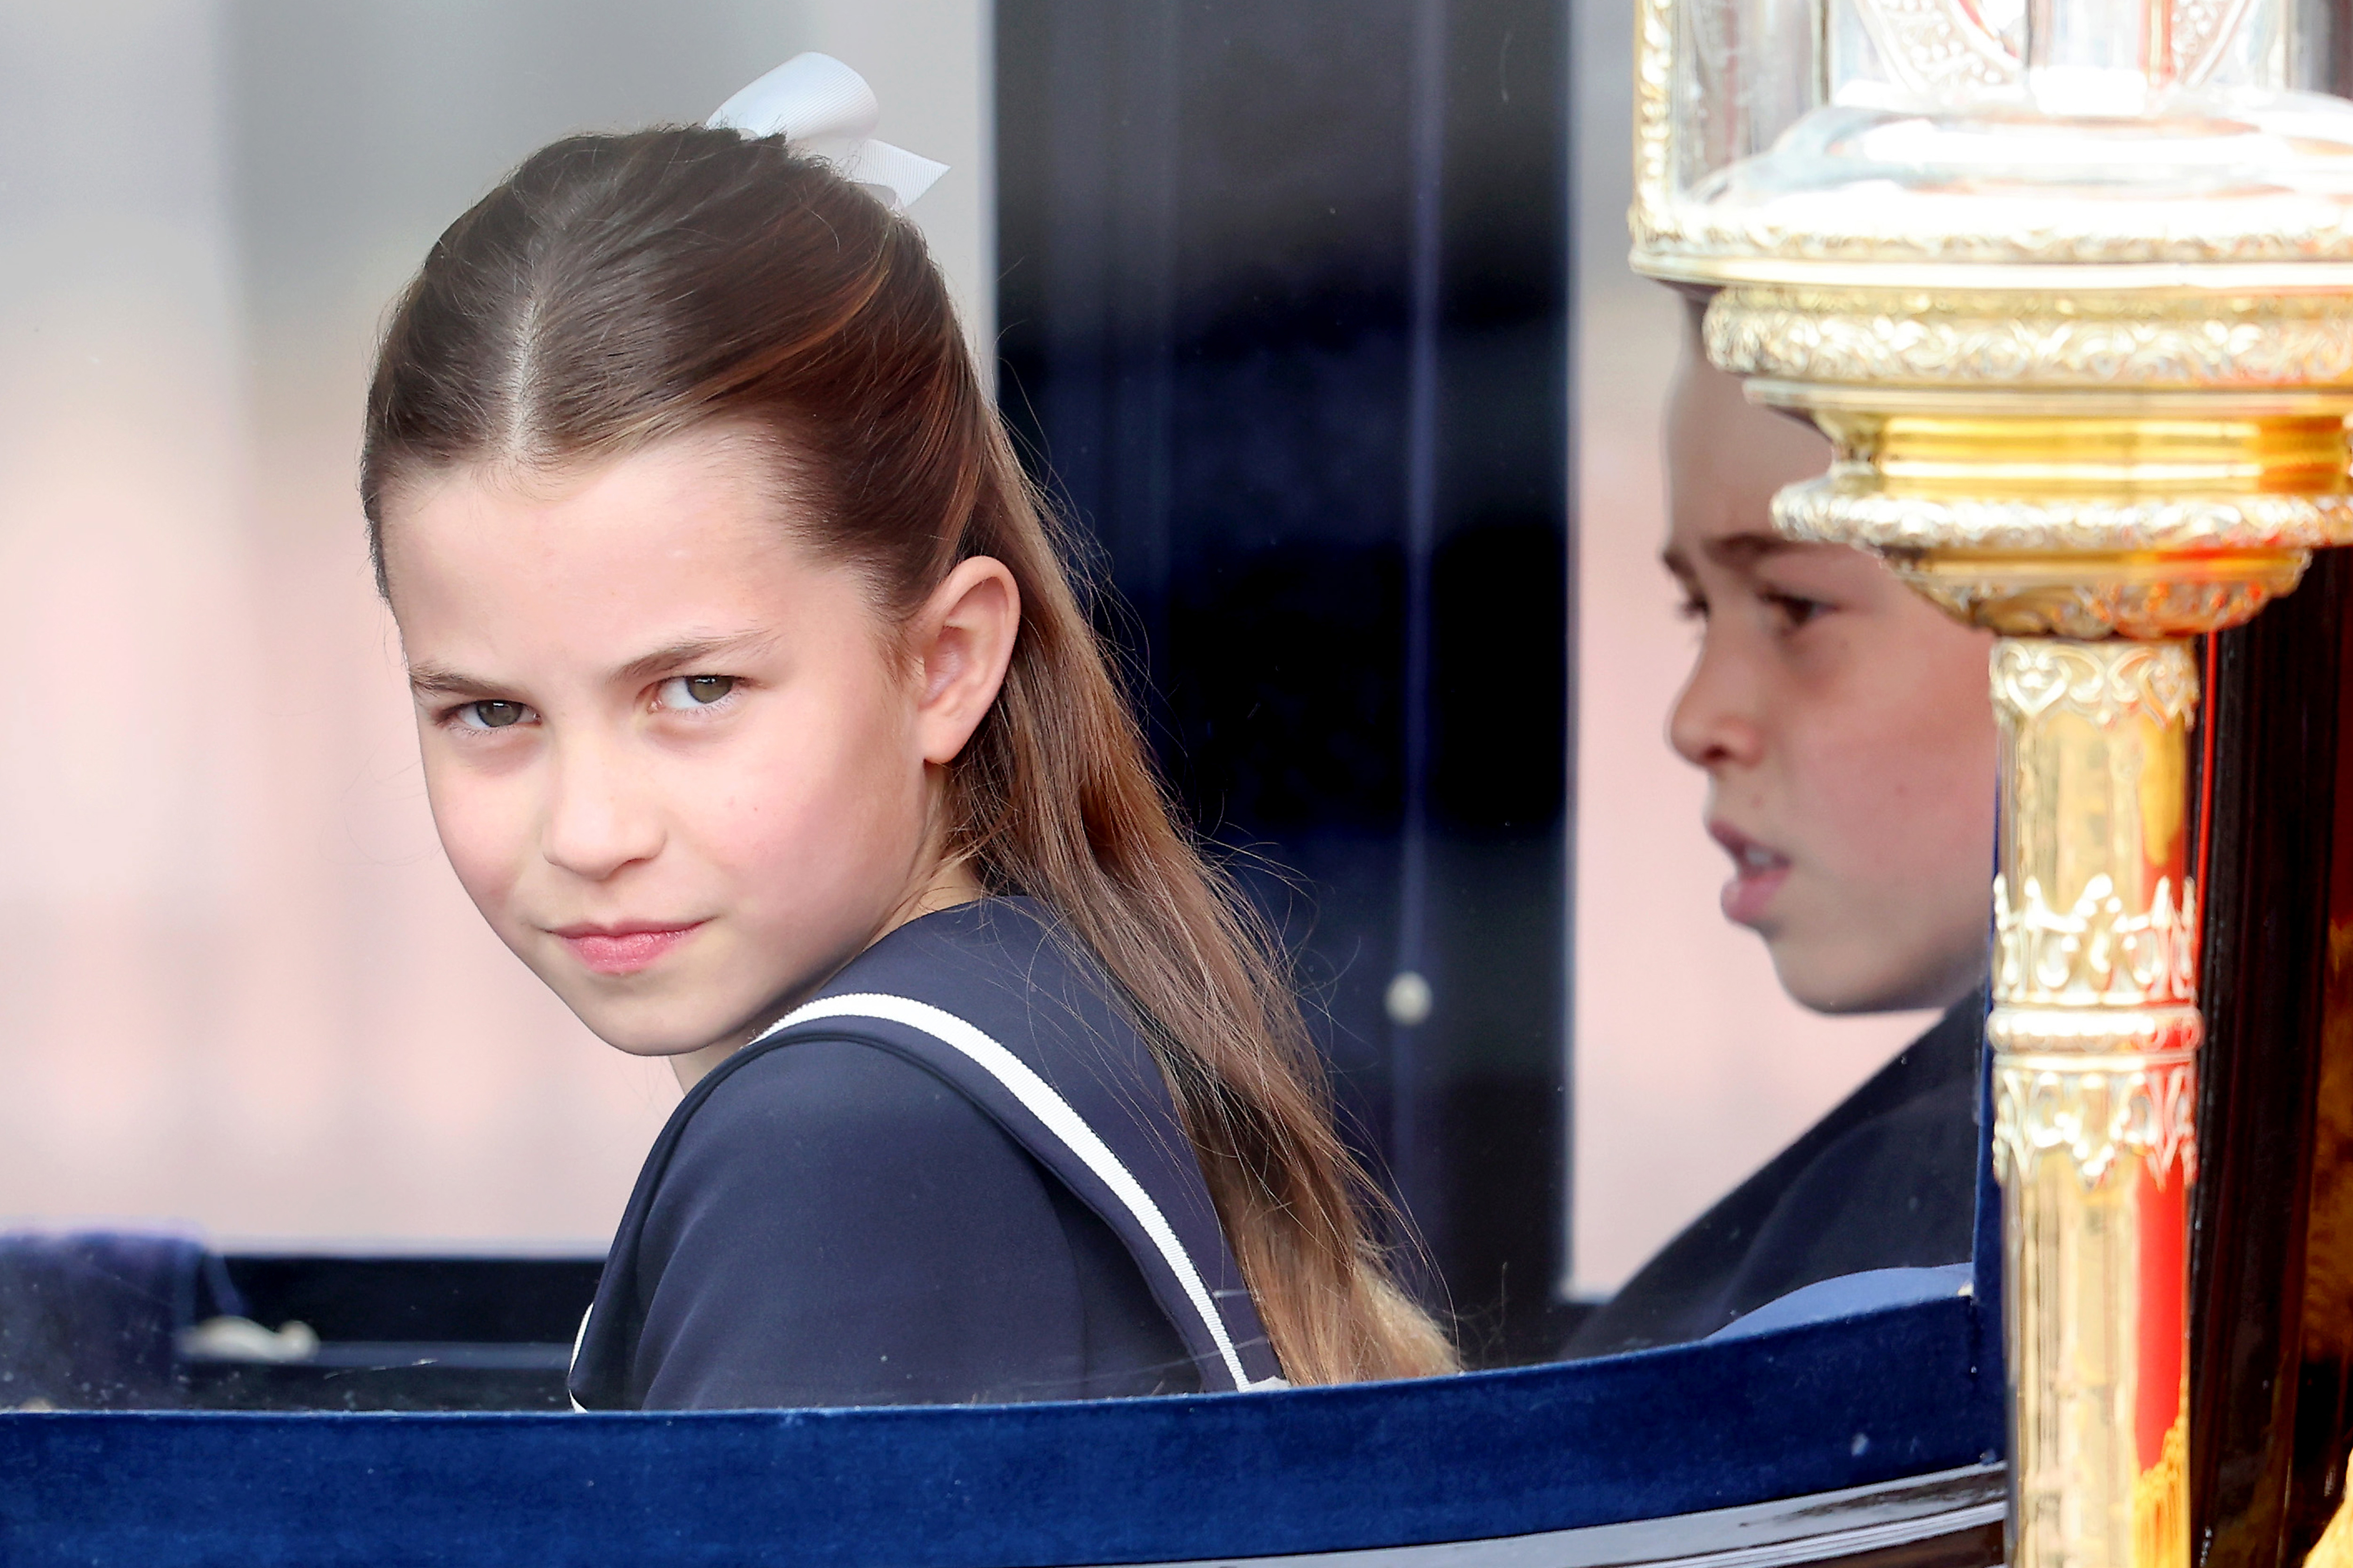 Princess Charlotte dressed in a formal outfit with a white bow in her hair, sitting in a carriage, with her reflection visible in the window